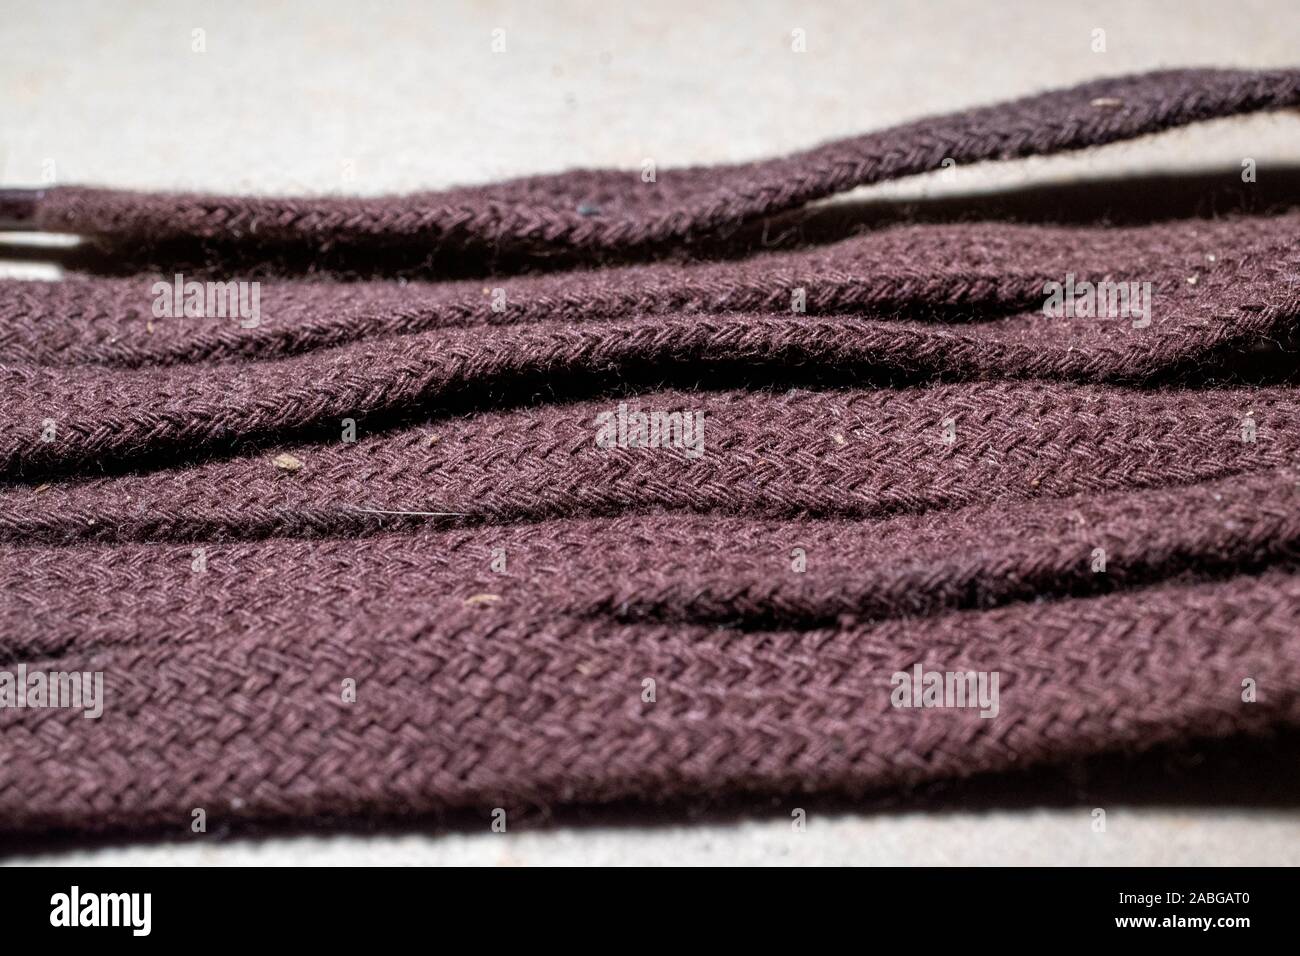 close-up of a brown shoelace Stock Photo